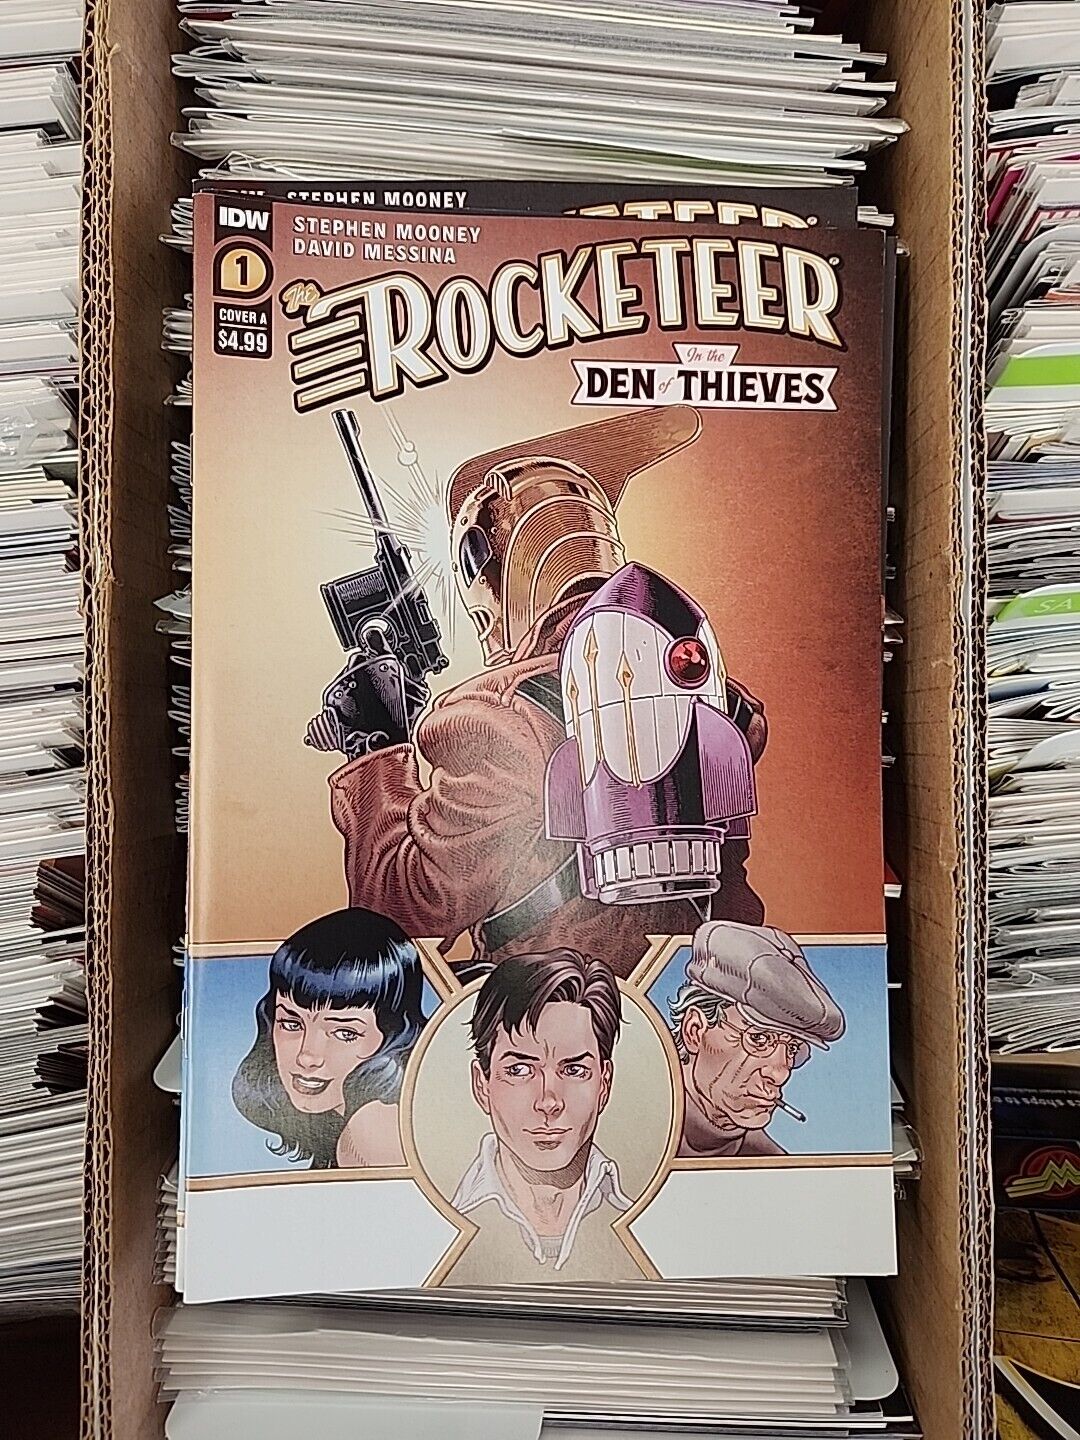 The Rocketeer In The Den Of Theives #1-#4